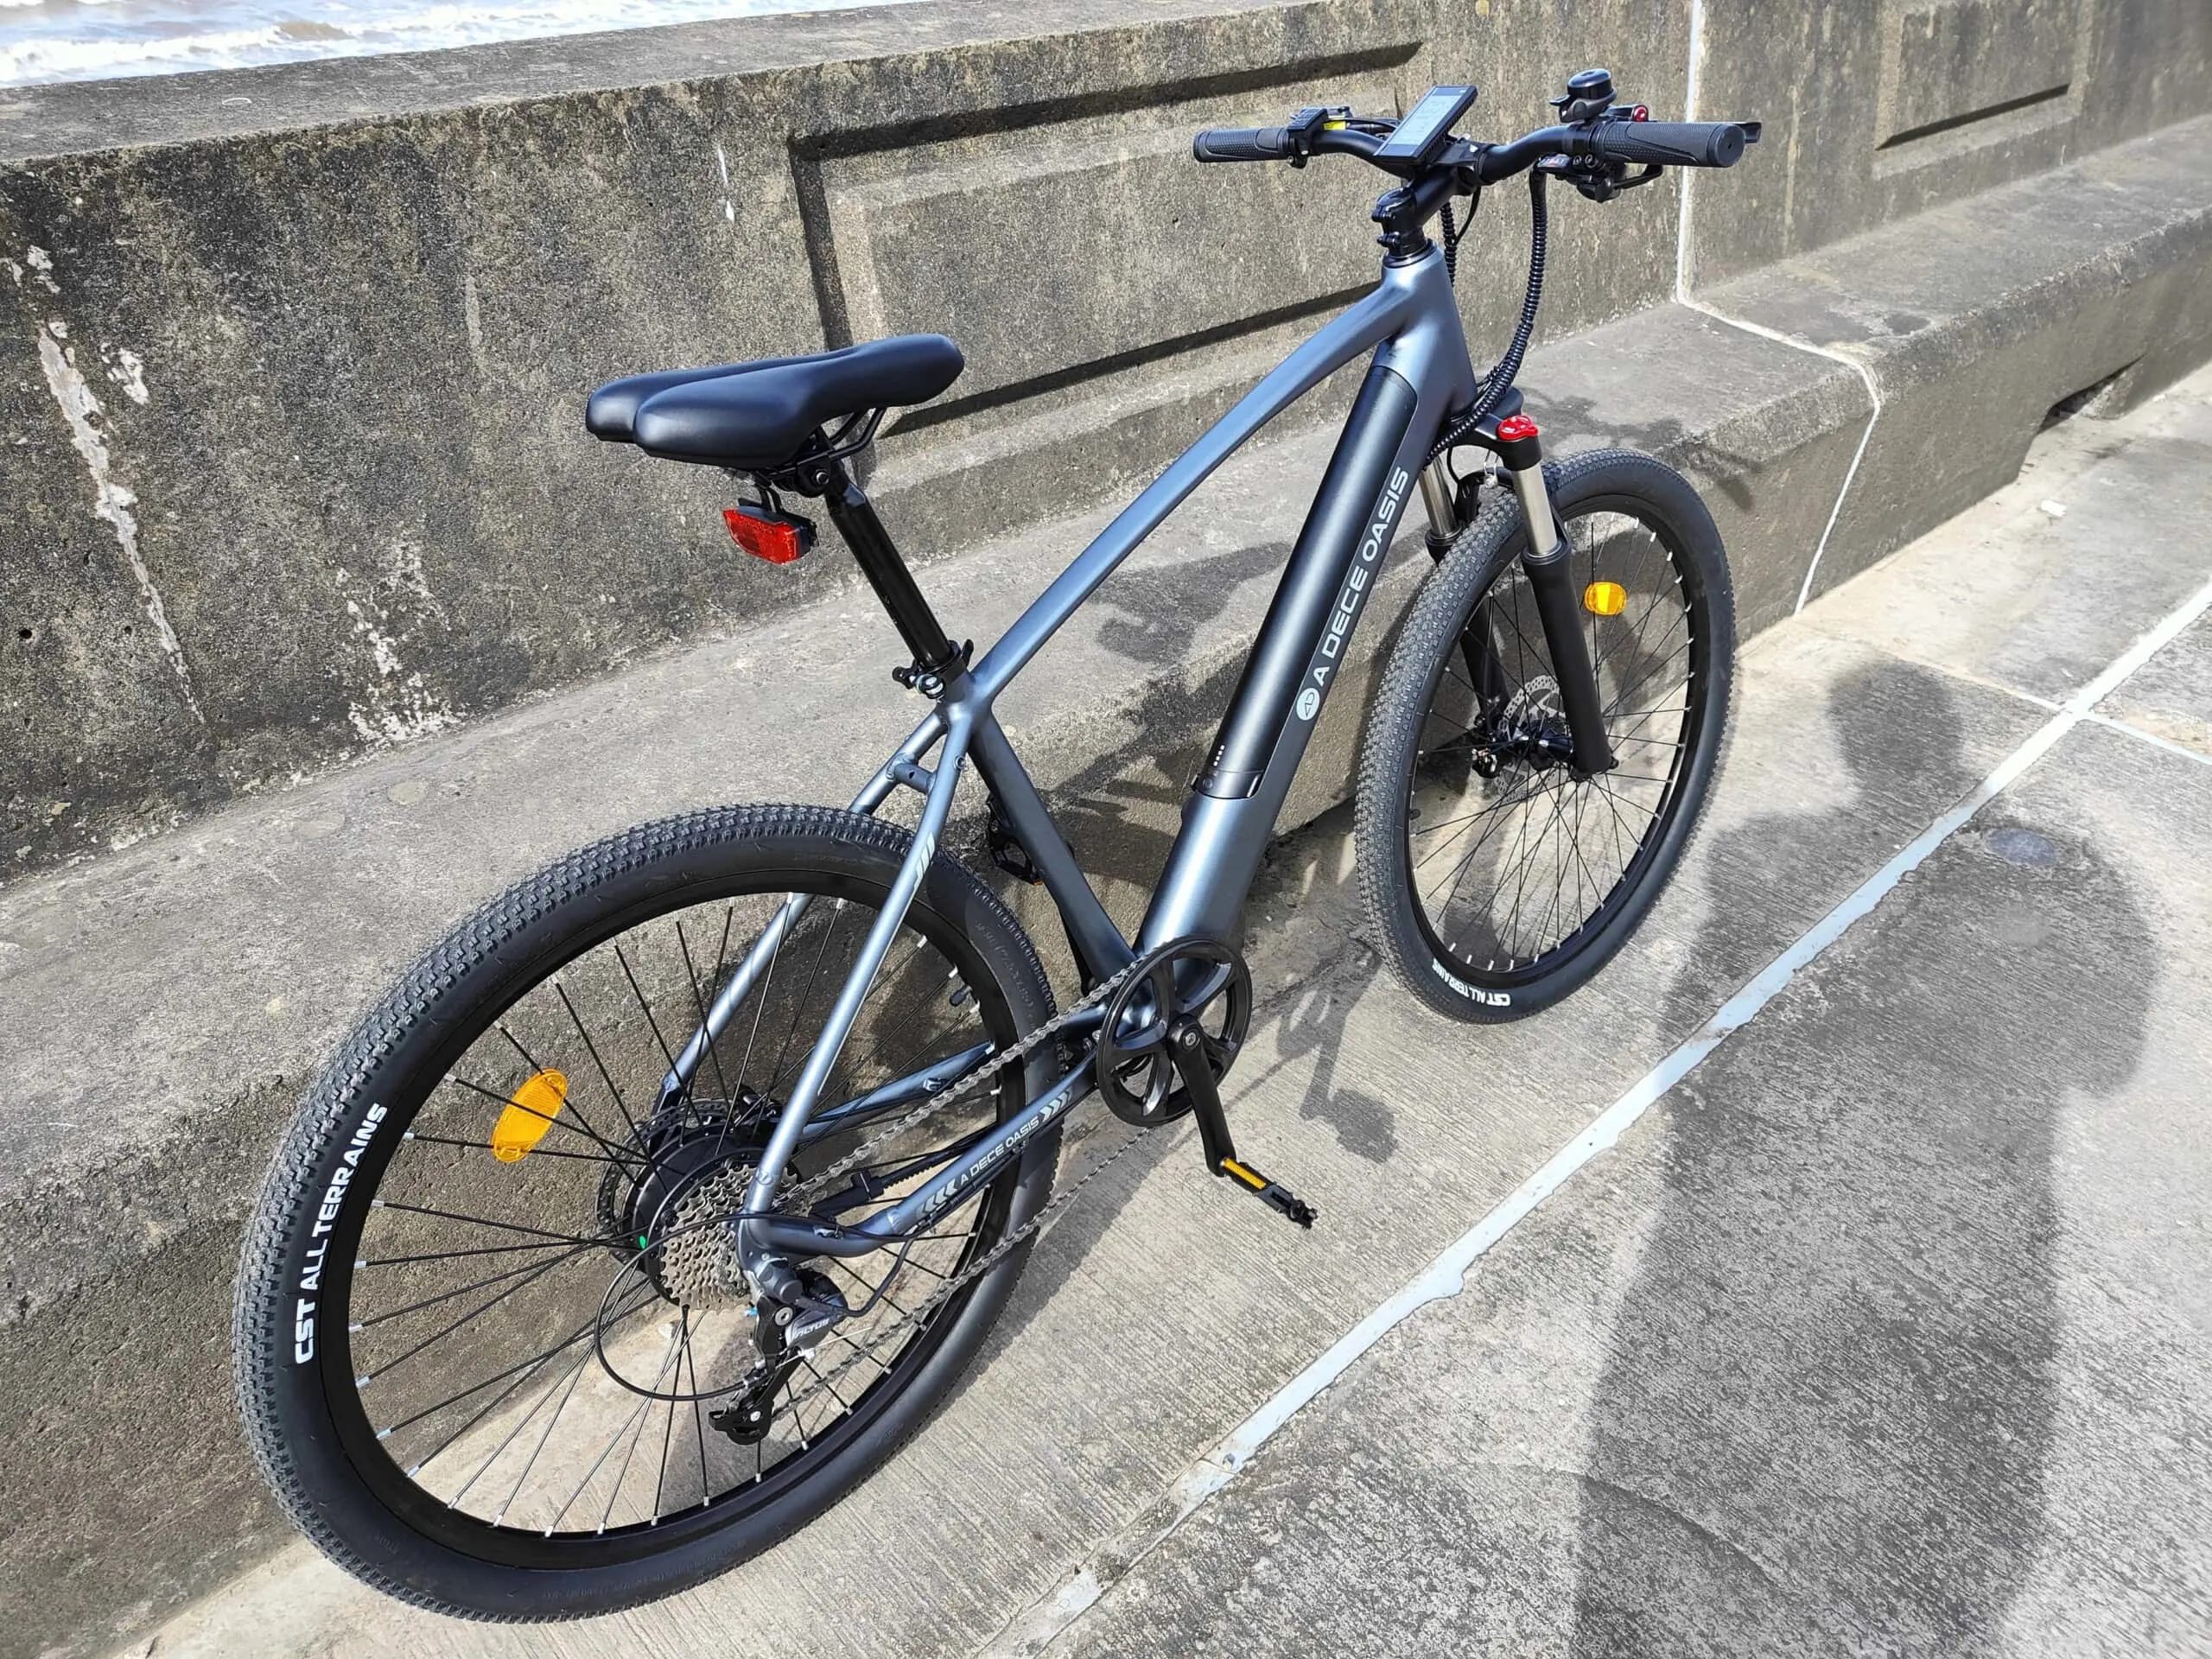 ADO D30C E Bike Review 1 scaled - ADO D30C E-Bike Review – An excellent mixed-use electric bike ideal for long commutes